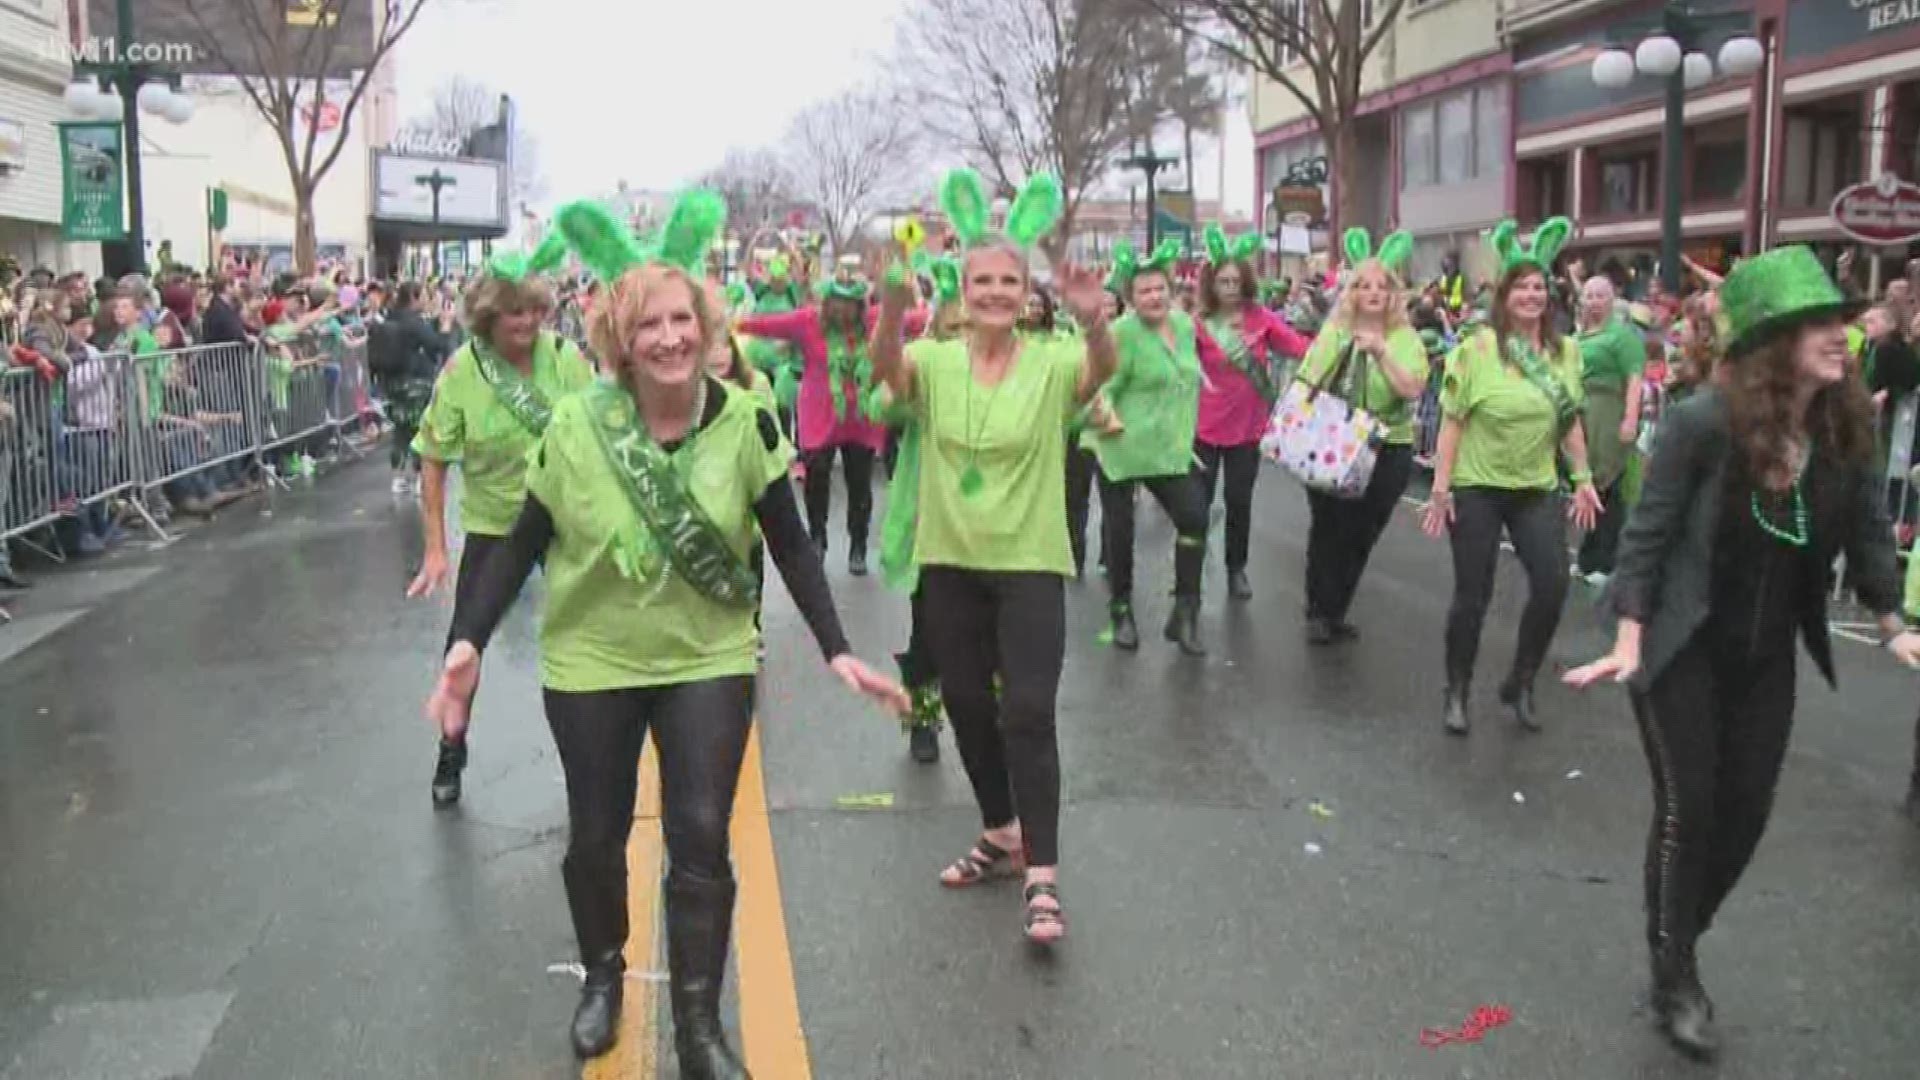 It's the city's 16th annual first-ever shortest St. Patrick's day parade.